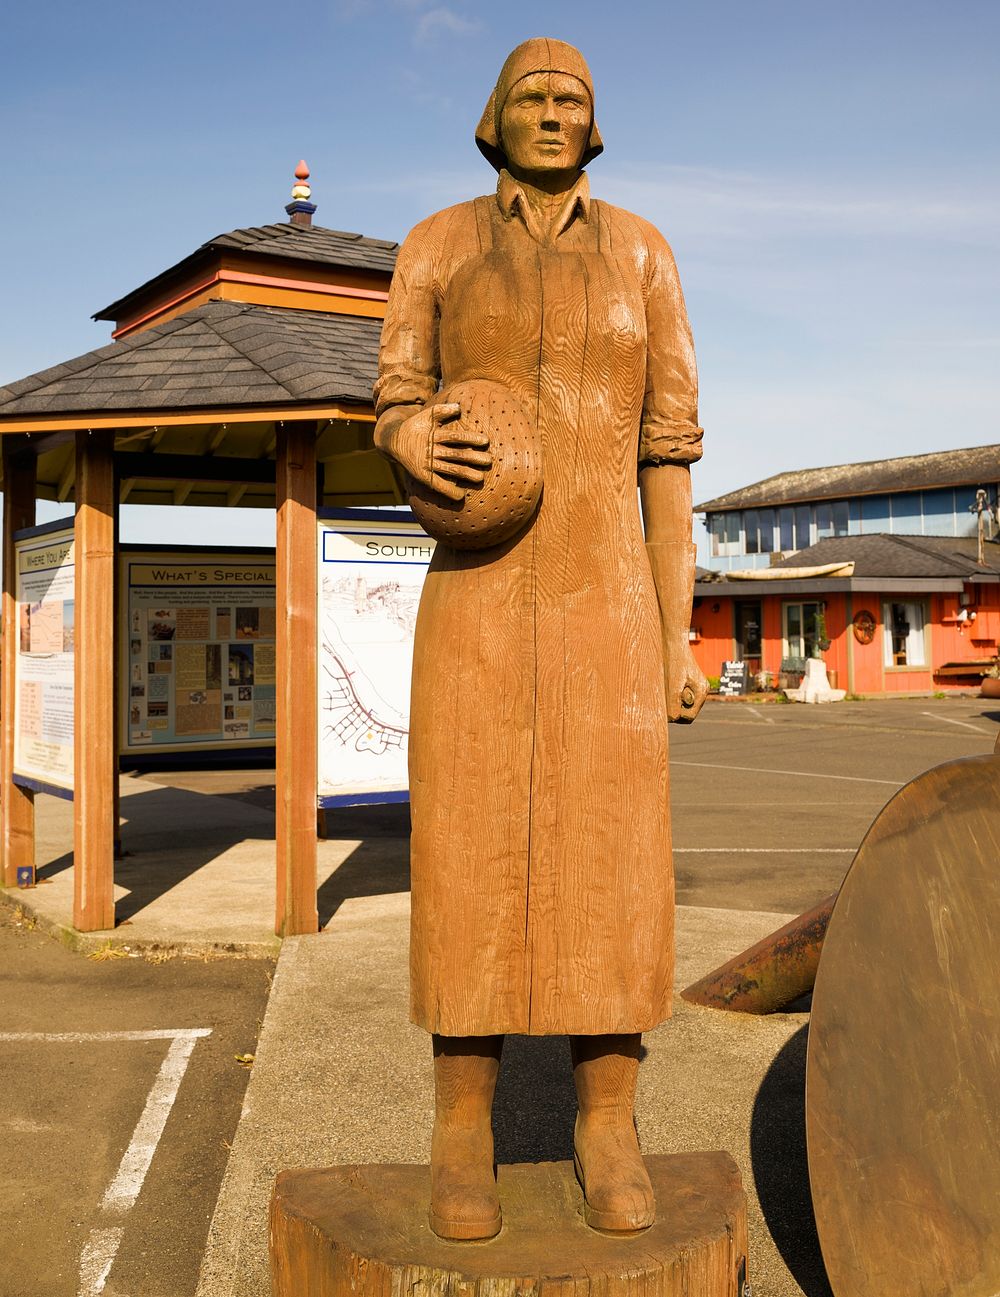 Oyster lady wooden carved statue in the Willapa River community of South Bend, Washington. Original image from Carol M.…